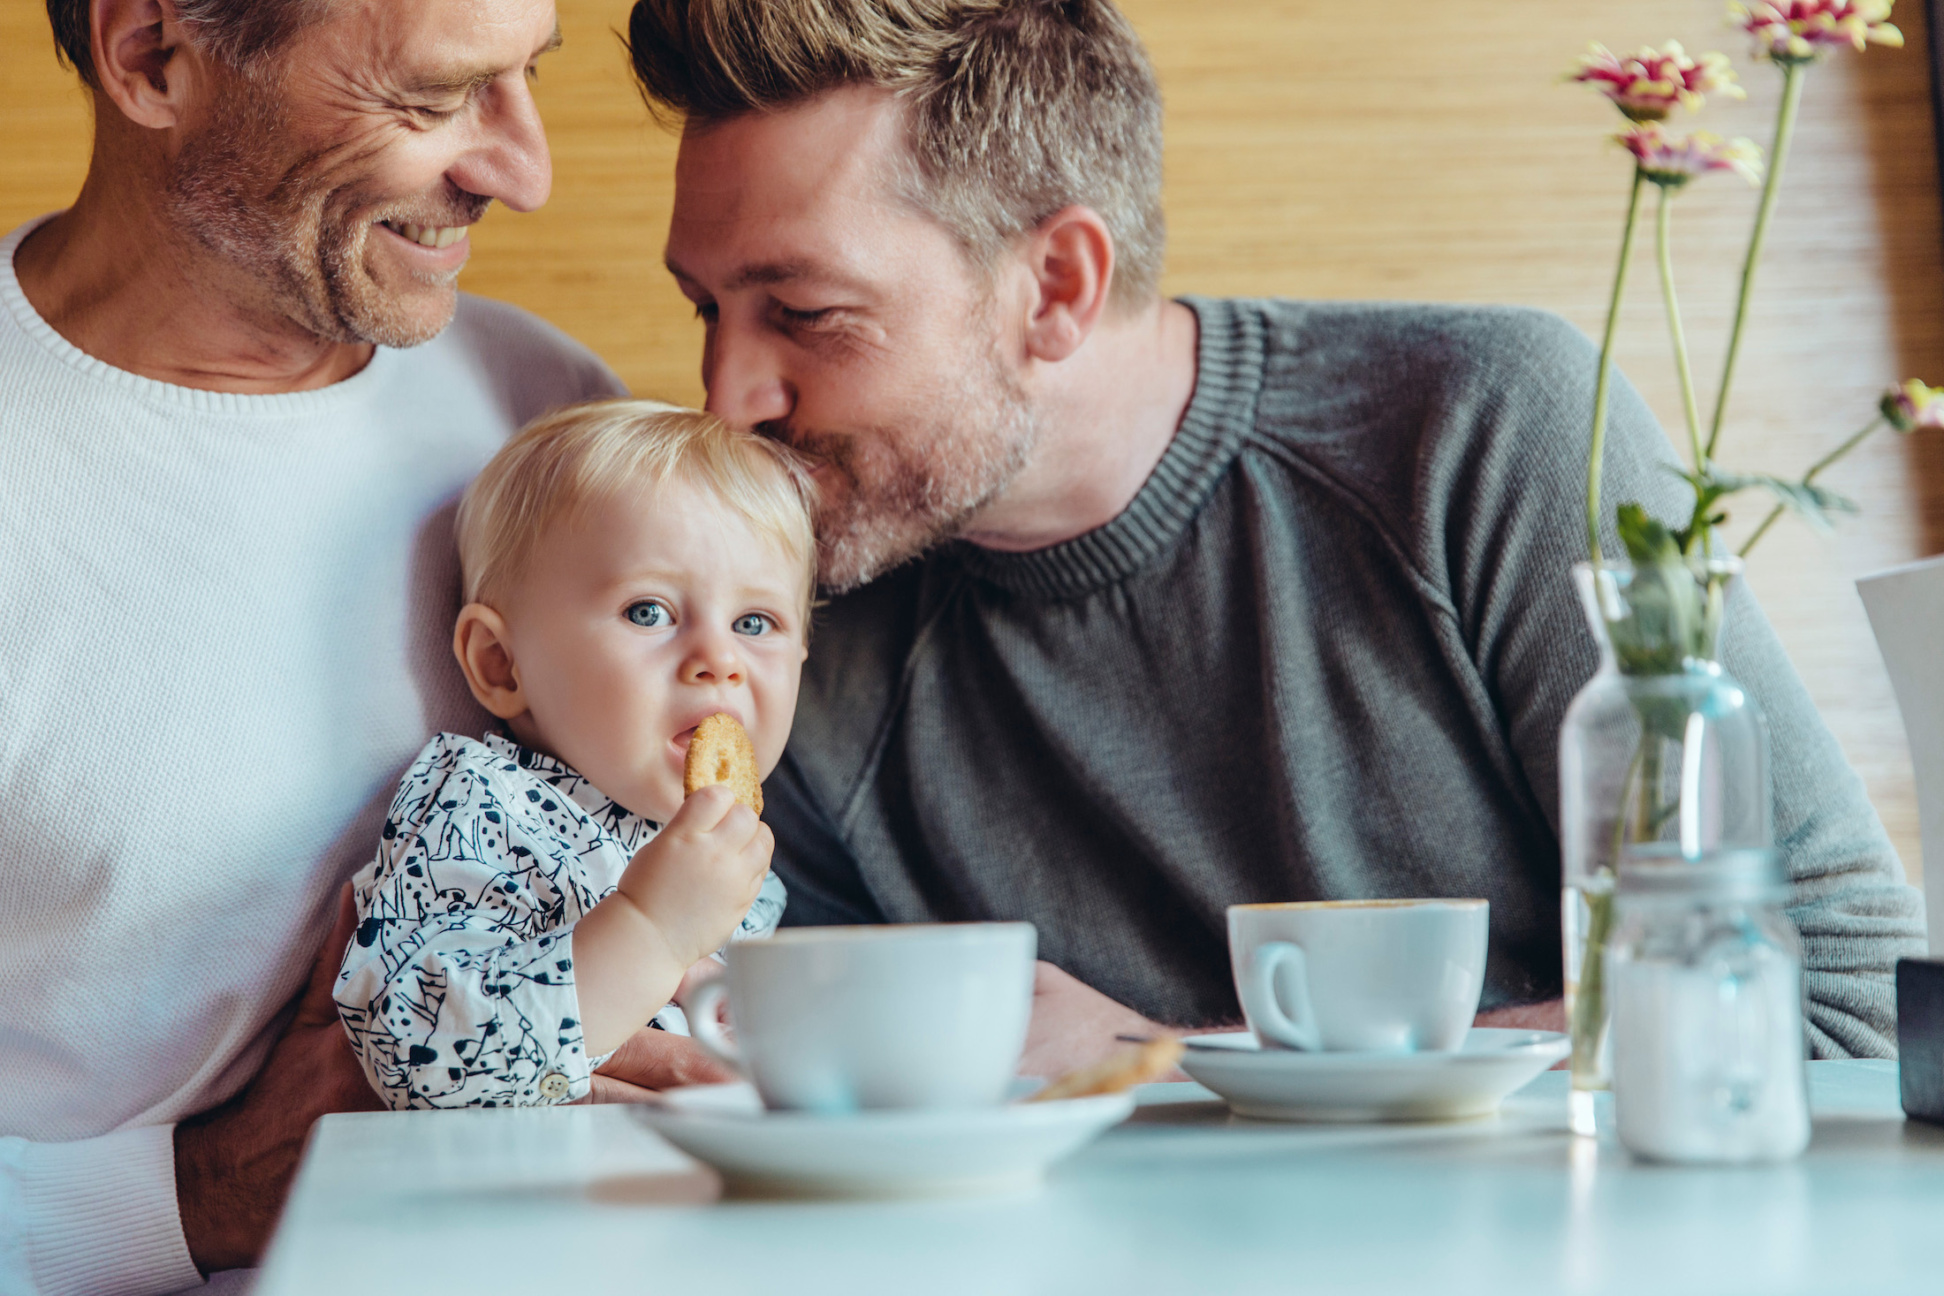 Same-sex parents cuddling their baby in cafe, Cologne, NRW, Germany